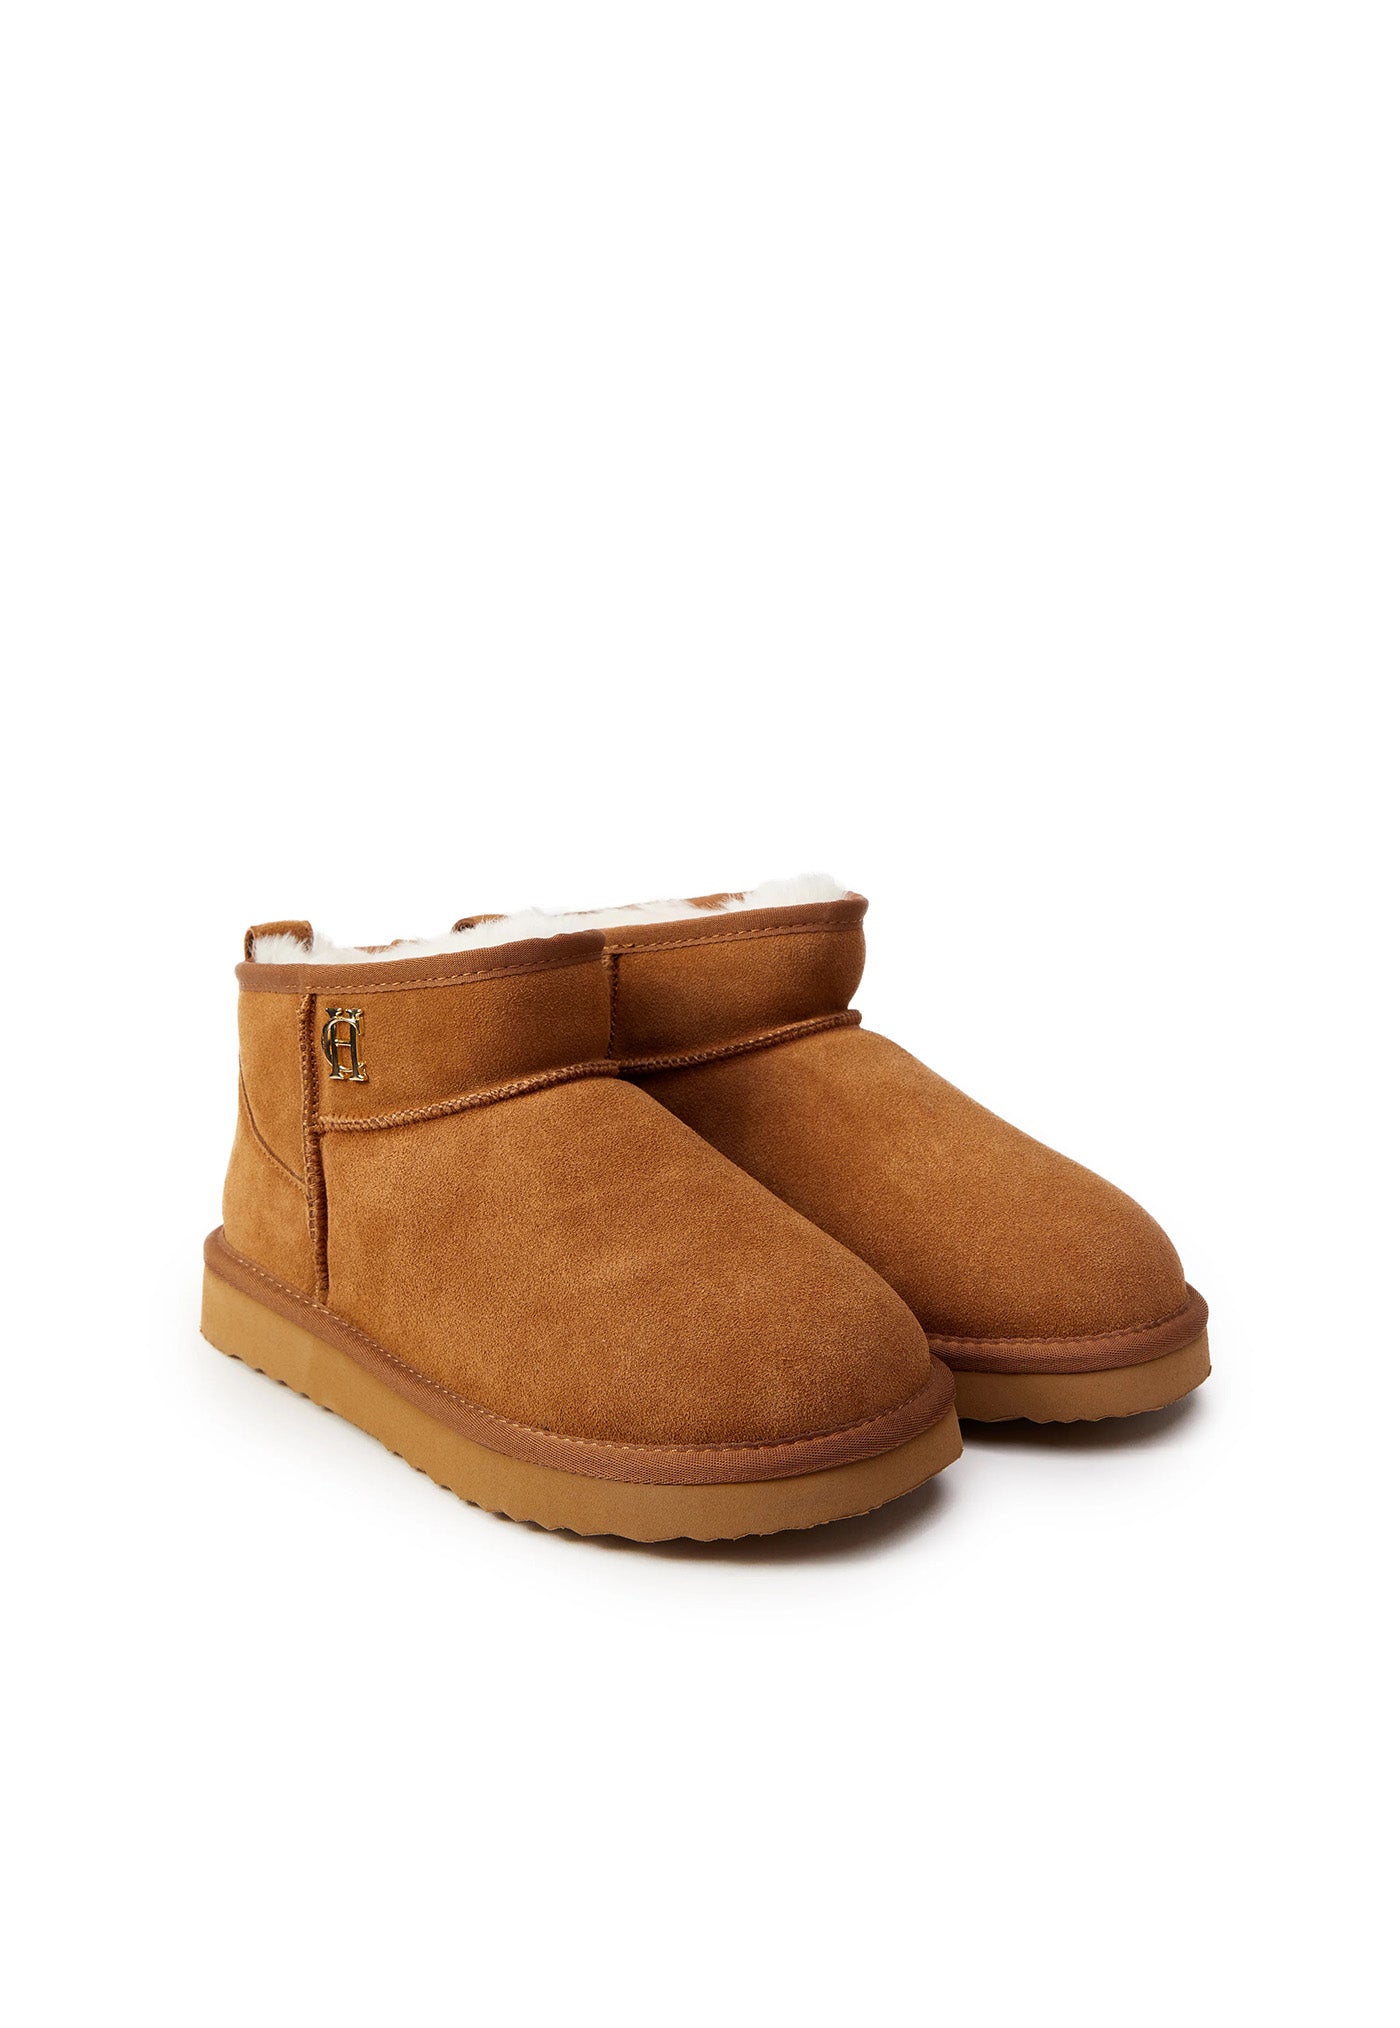 Ultra Mini Shearling Boot - Tan sold by Angel Divine